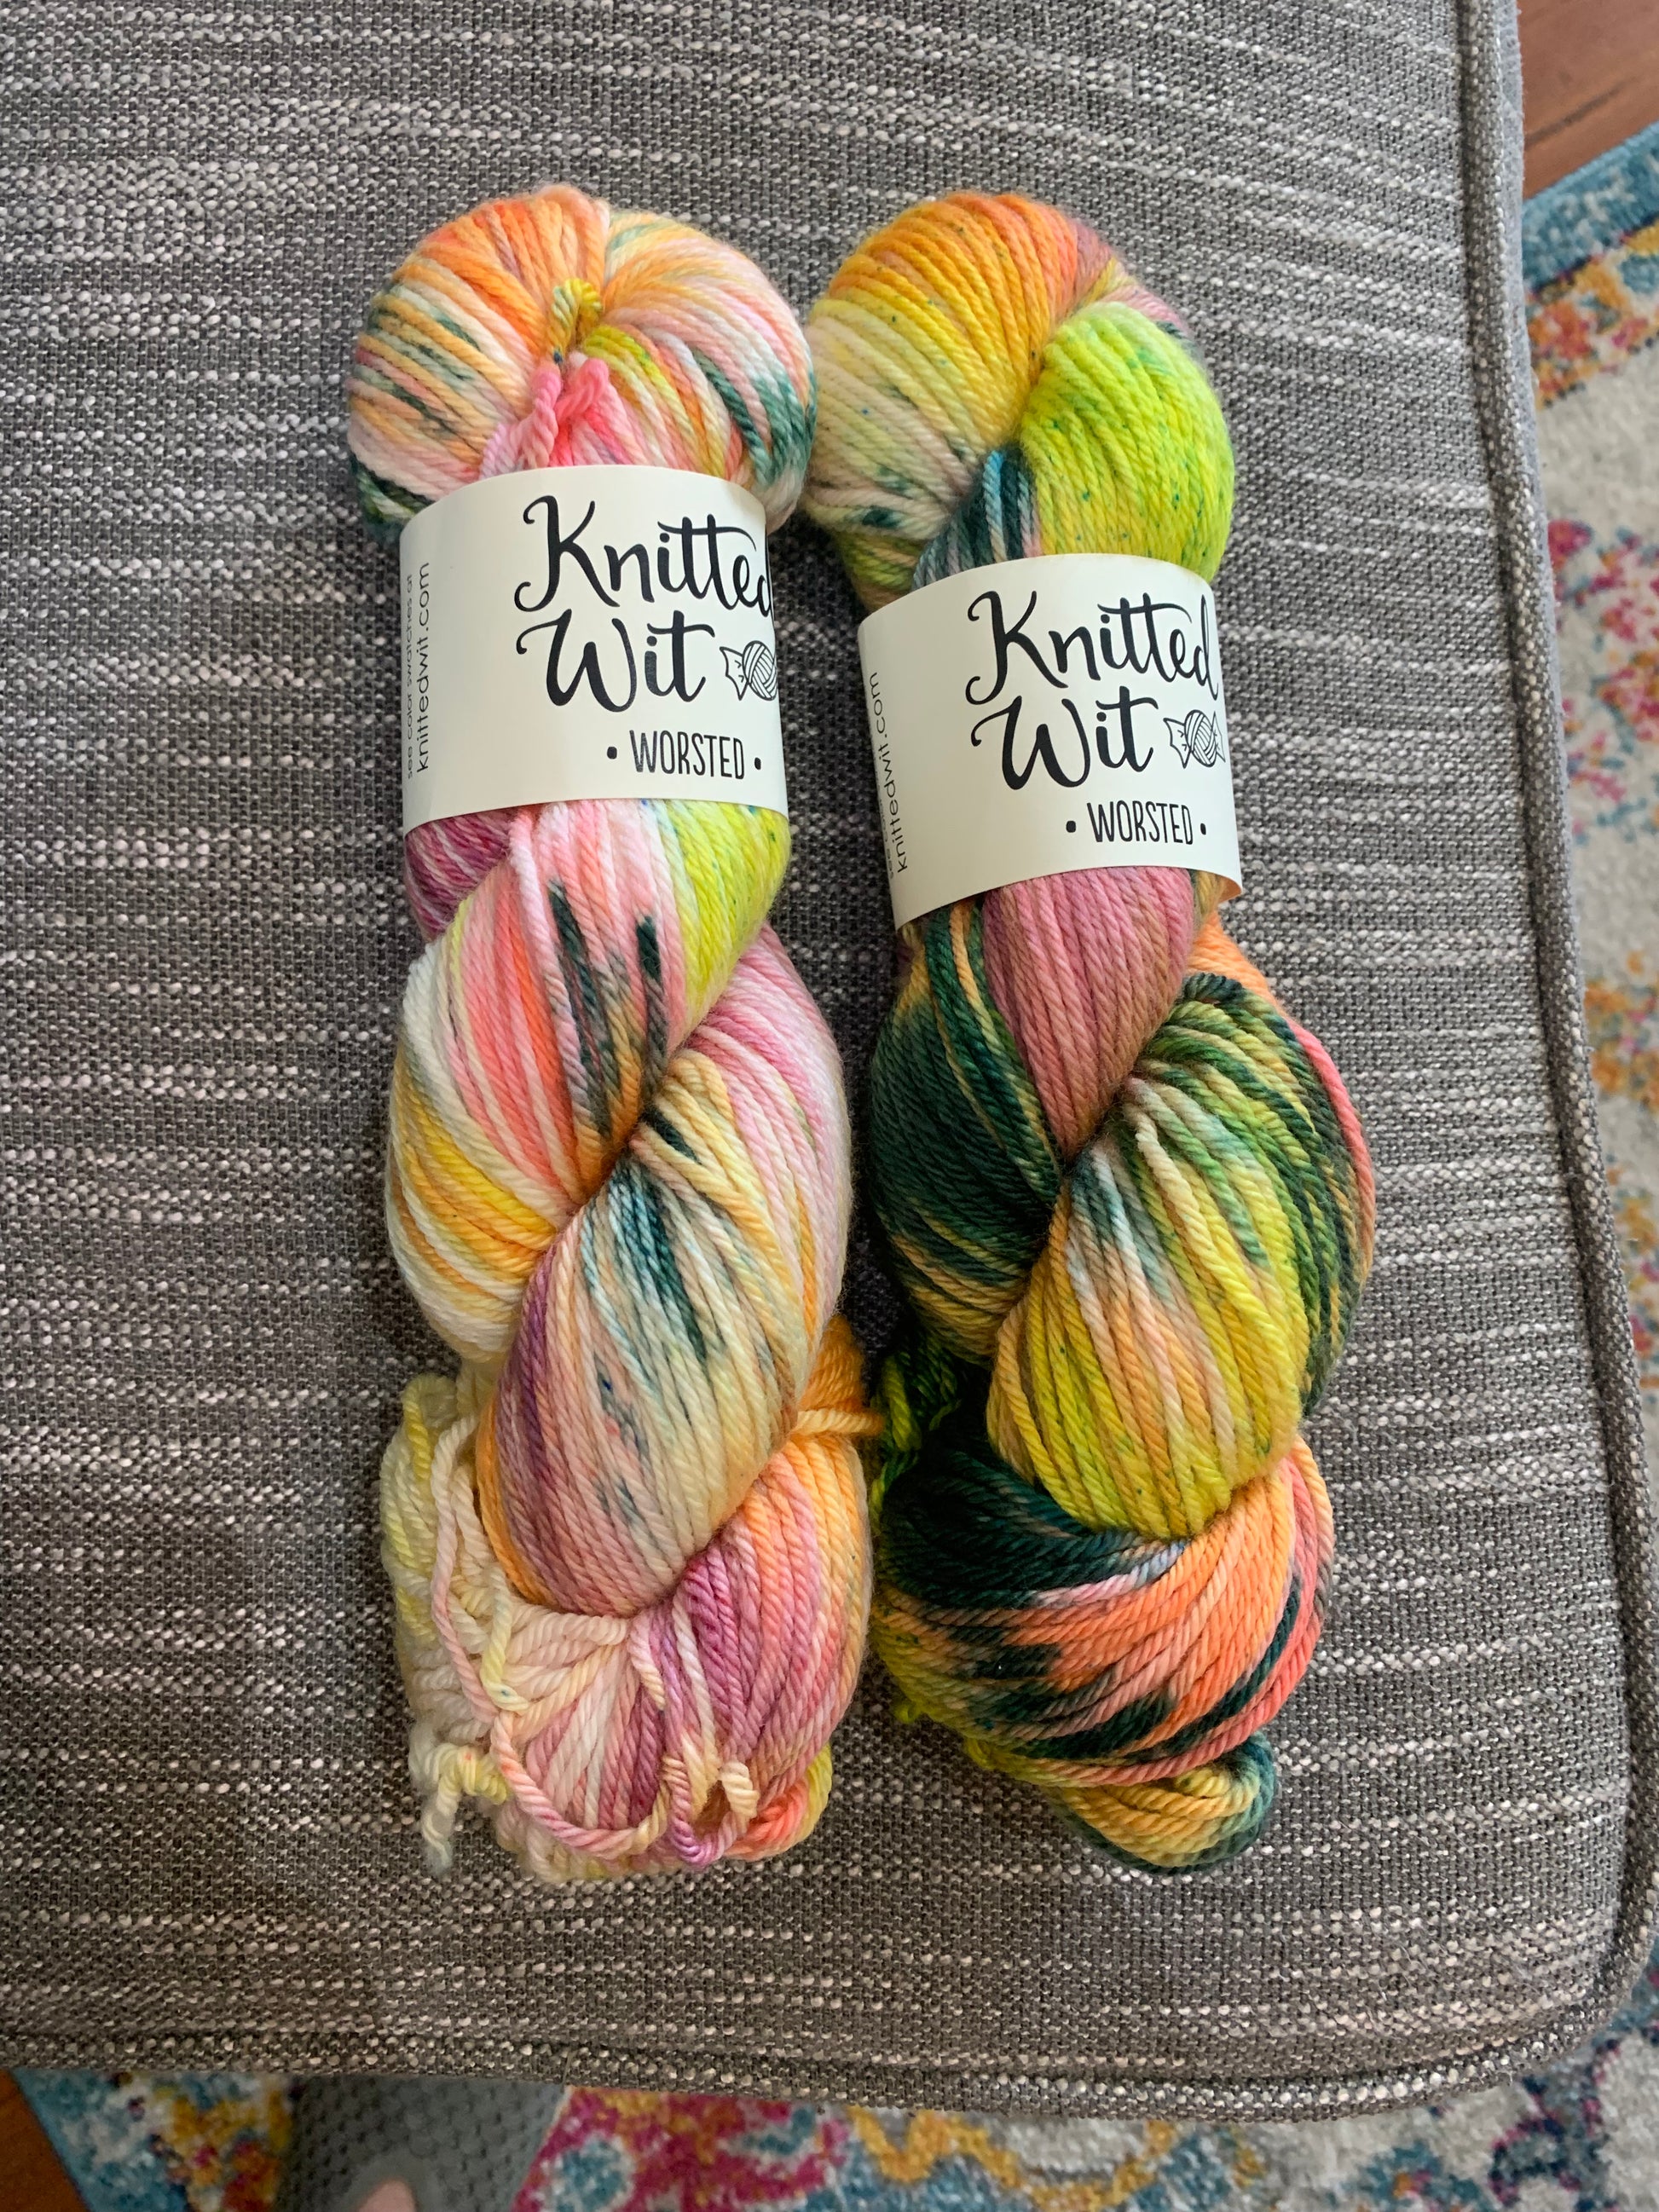 Knitted Wit Worsted SW - Woolyn